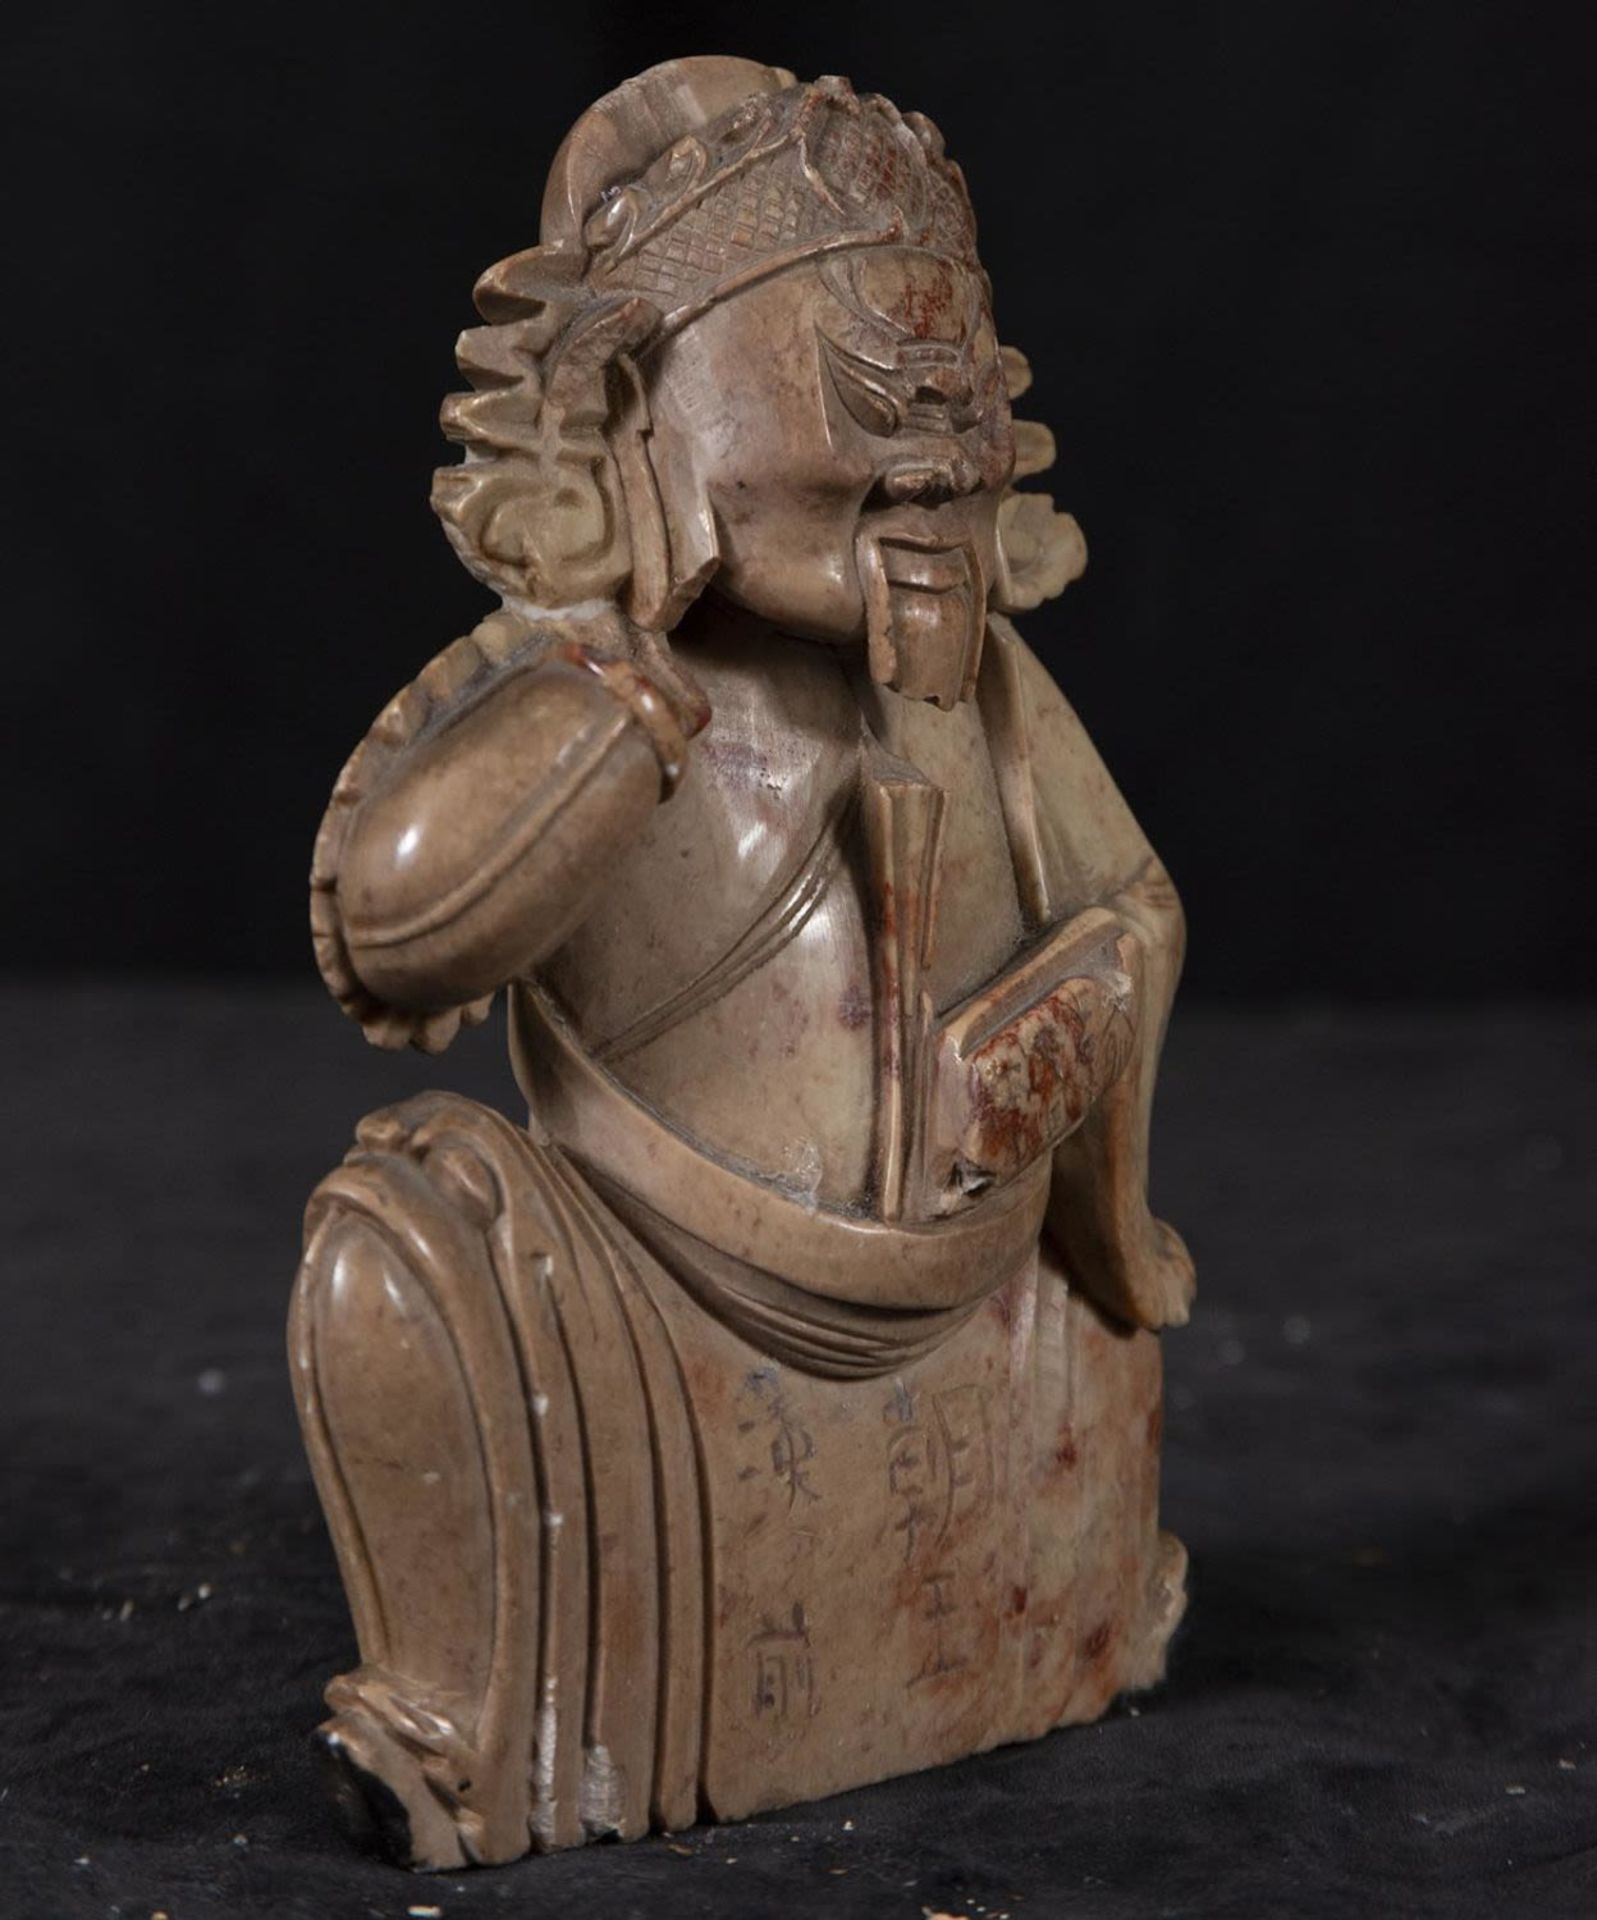 Guandi God or "God of War" Chinese in soapstone, Chinese school of the 18th century - early 19th cen - Image 3 of 4